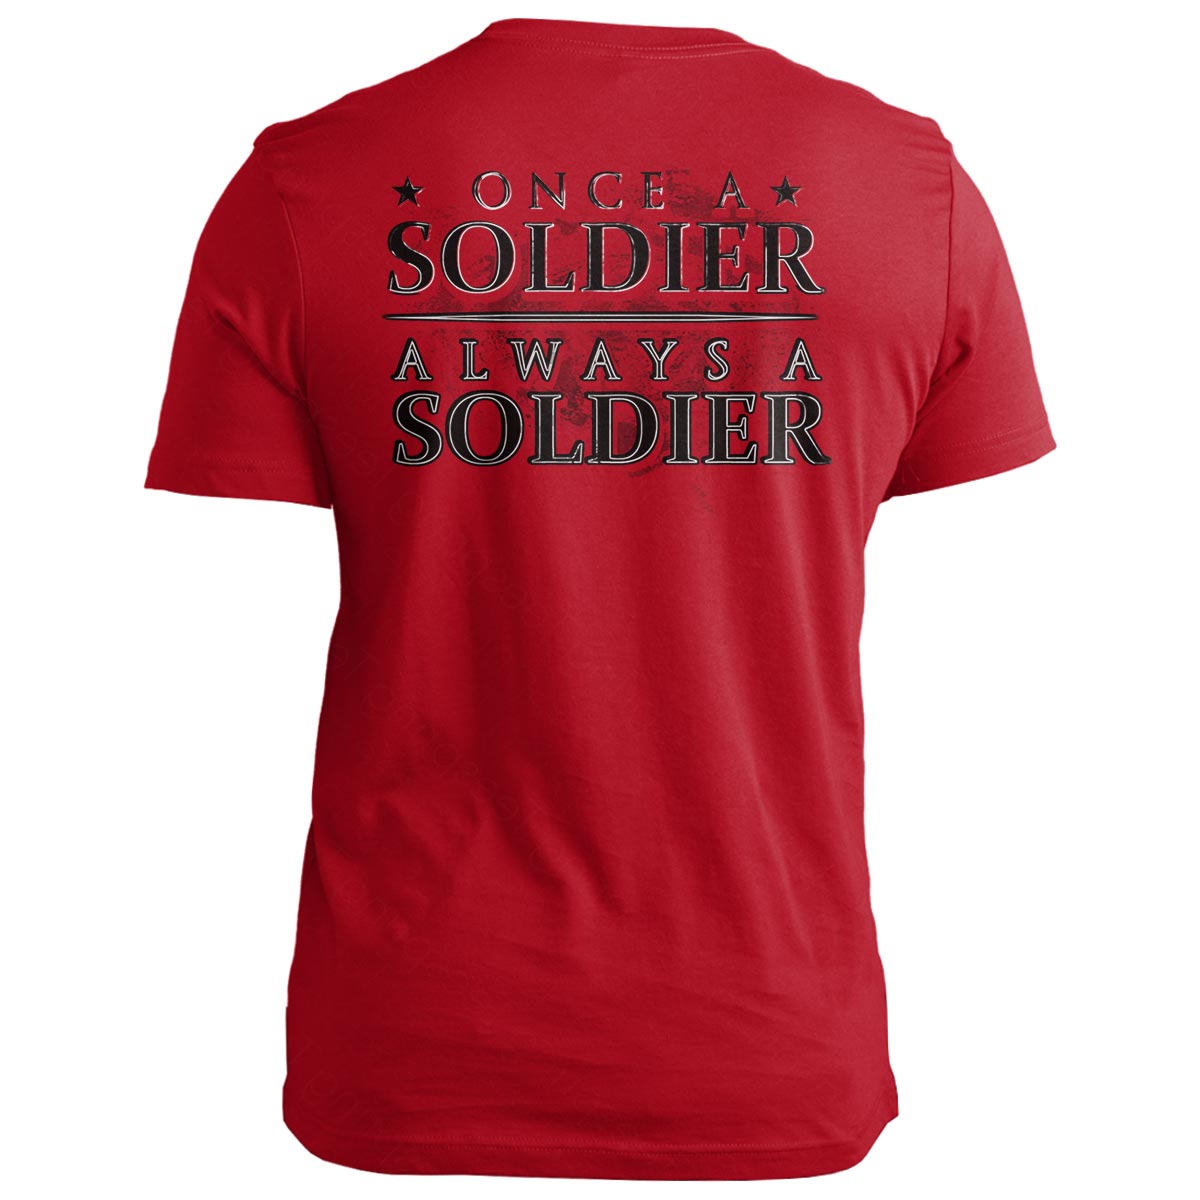 Once a Soldier, Always a Soldier